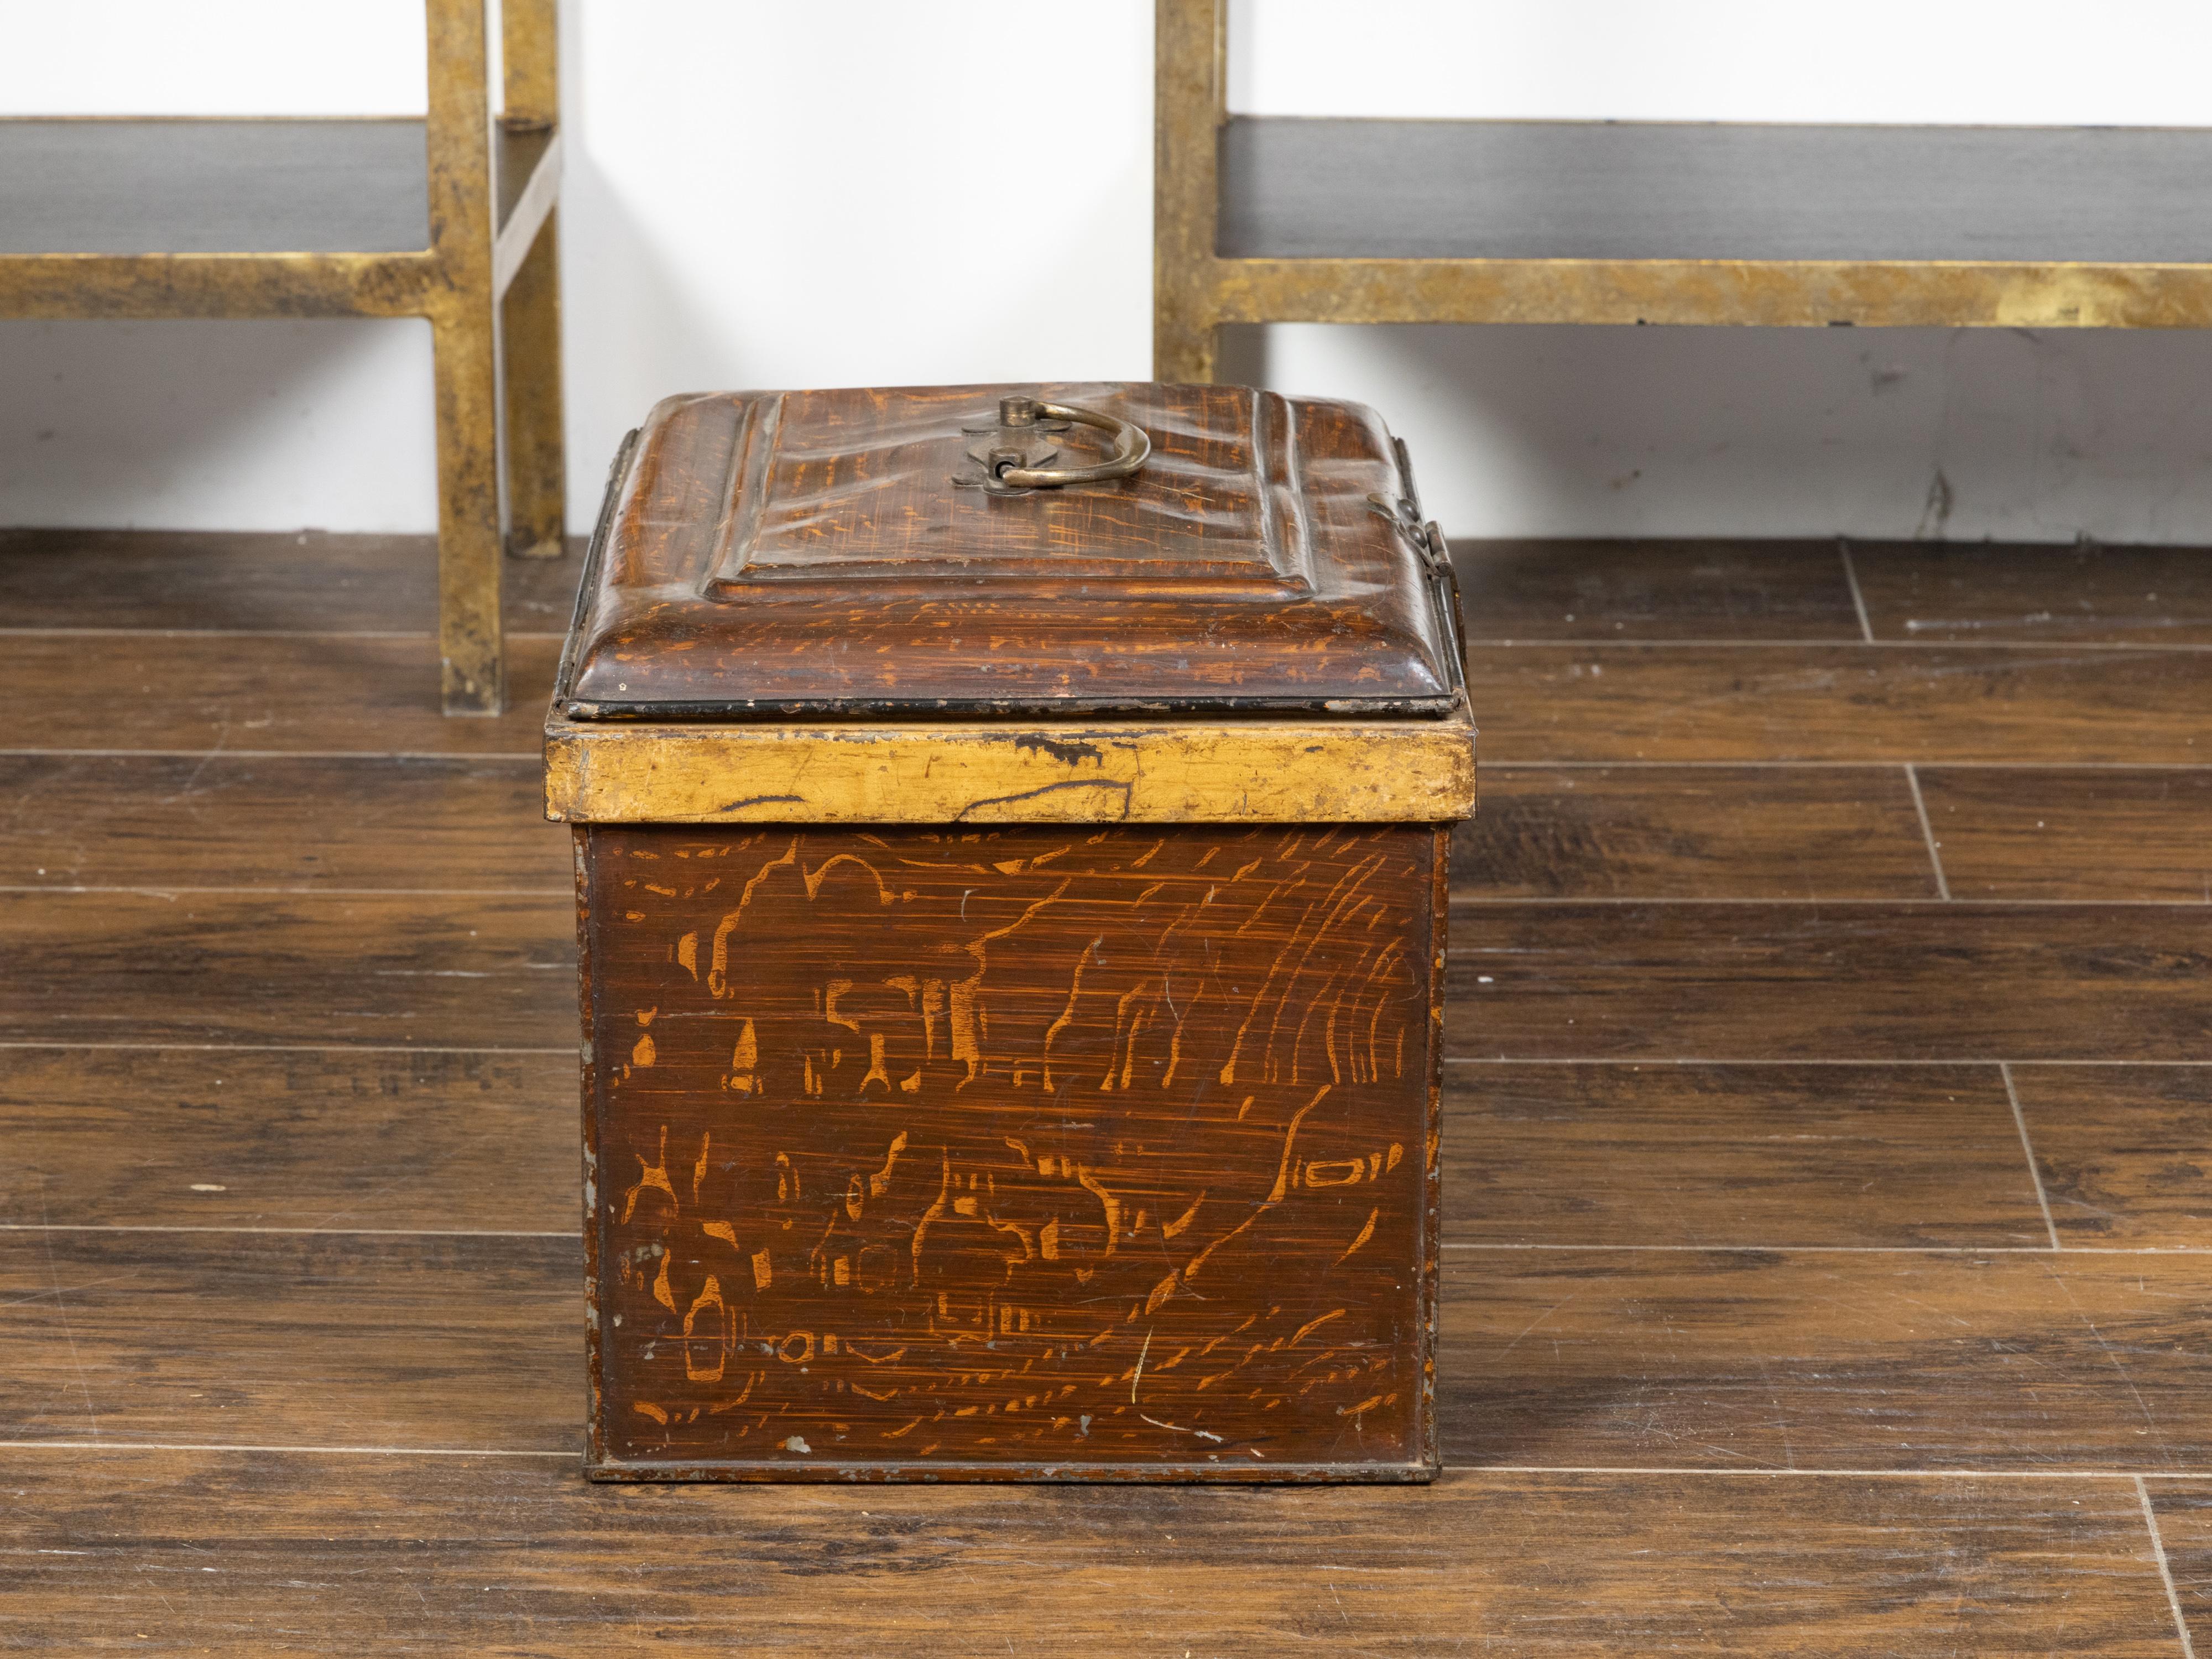 French 1890s Rustic Painted Tôle Box with Wood Grain Finish and Goldenrod Accent For Sale 4